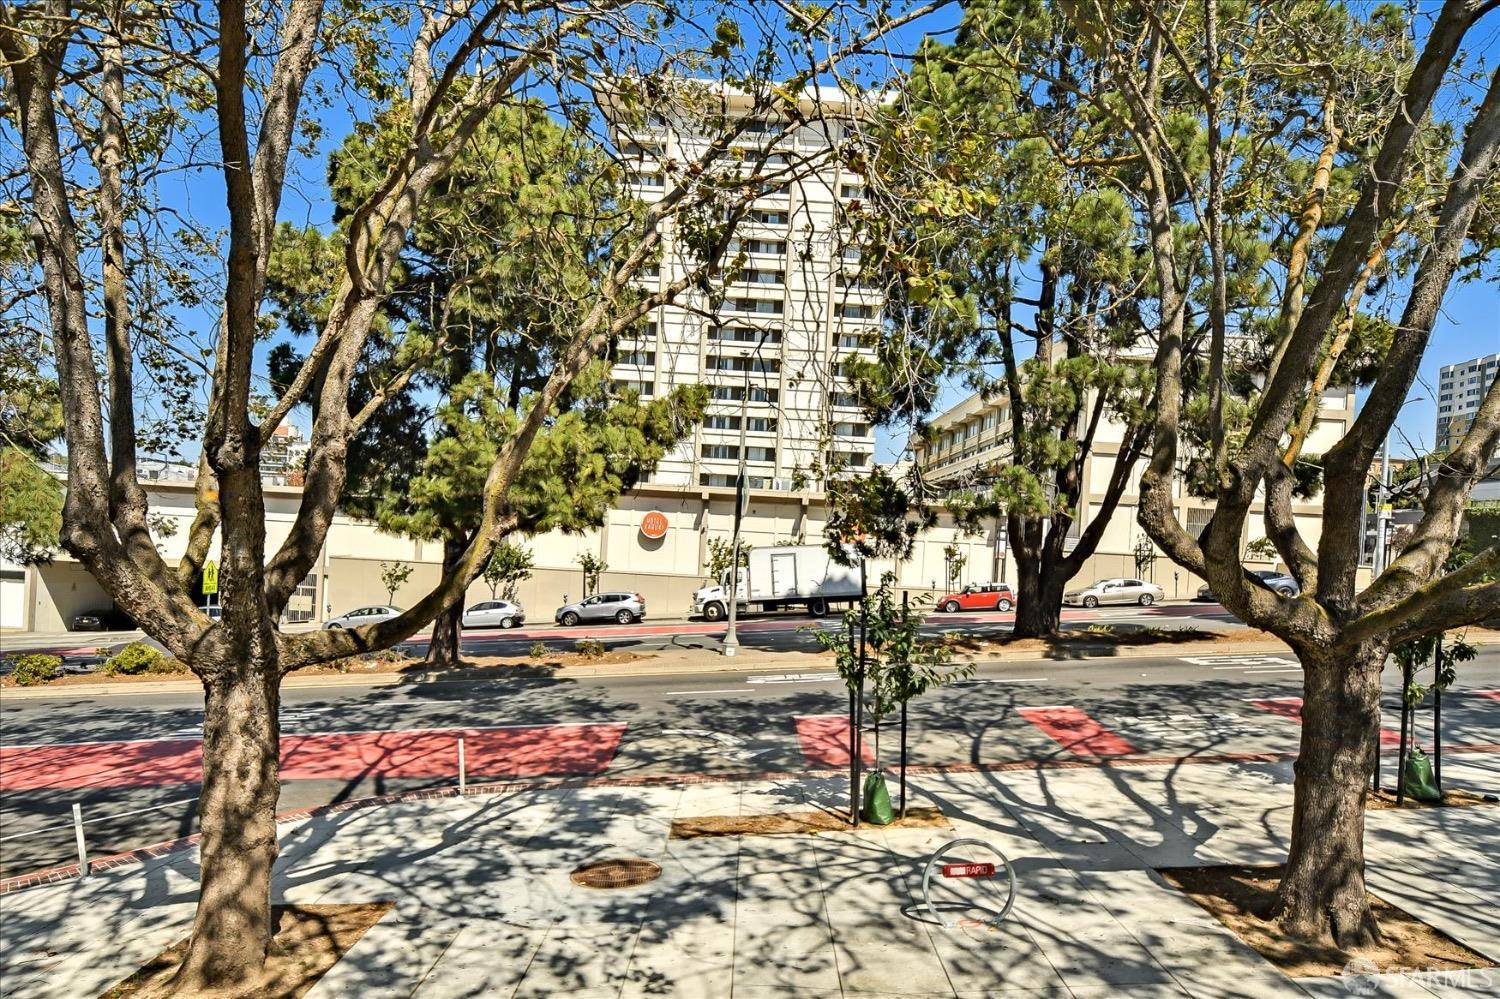 Photo of 1545 Geary Blvd #3 in San Francisco, CA